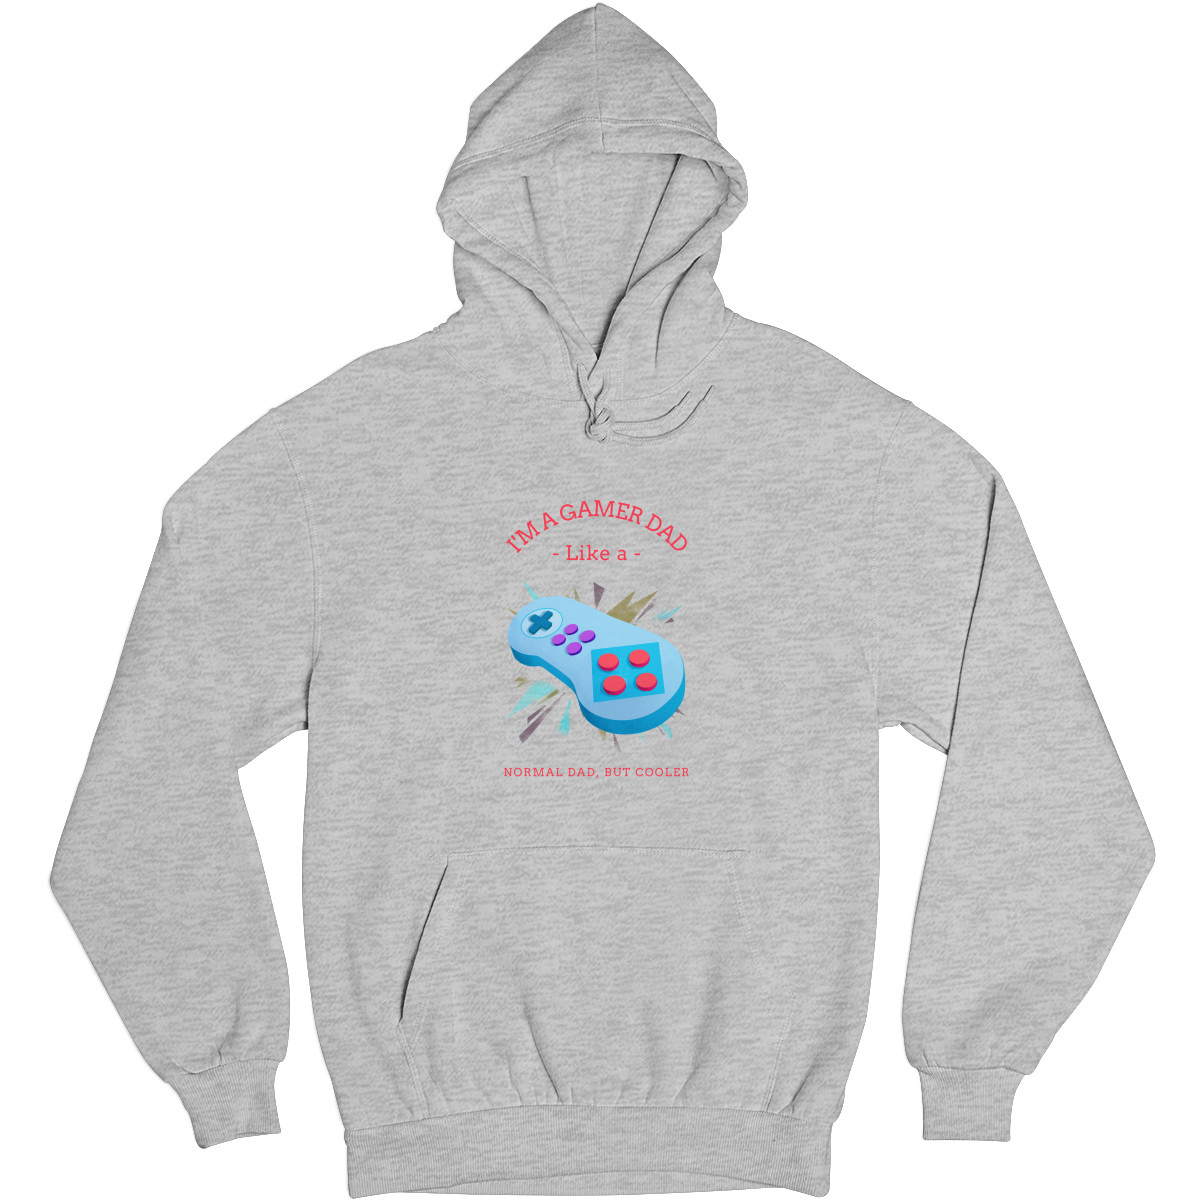 I'm a gamer like a dad Unisex Hoodie | Gray